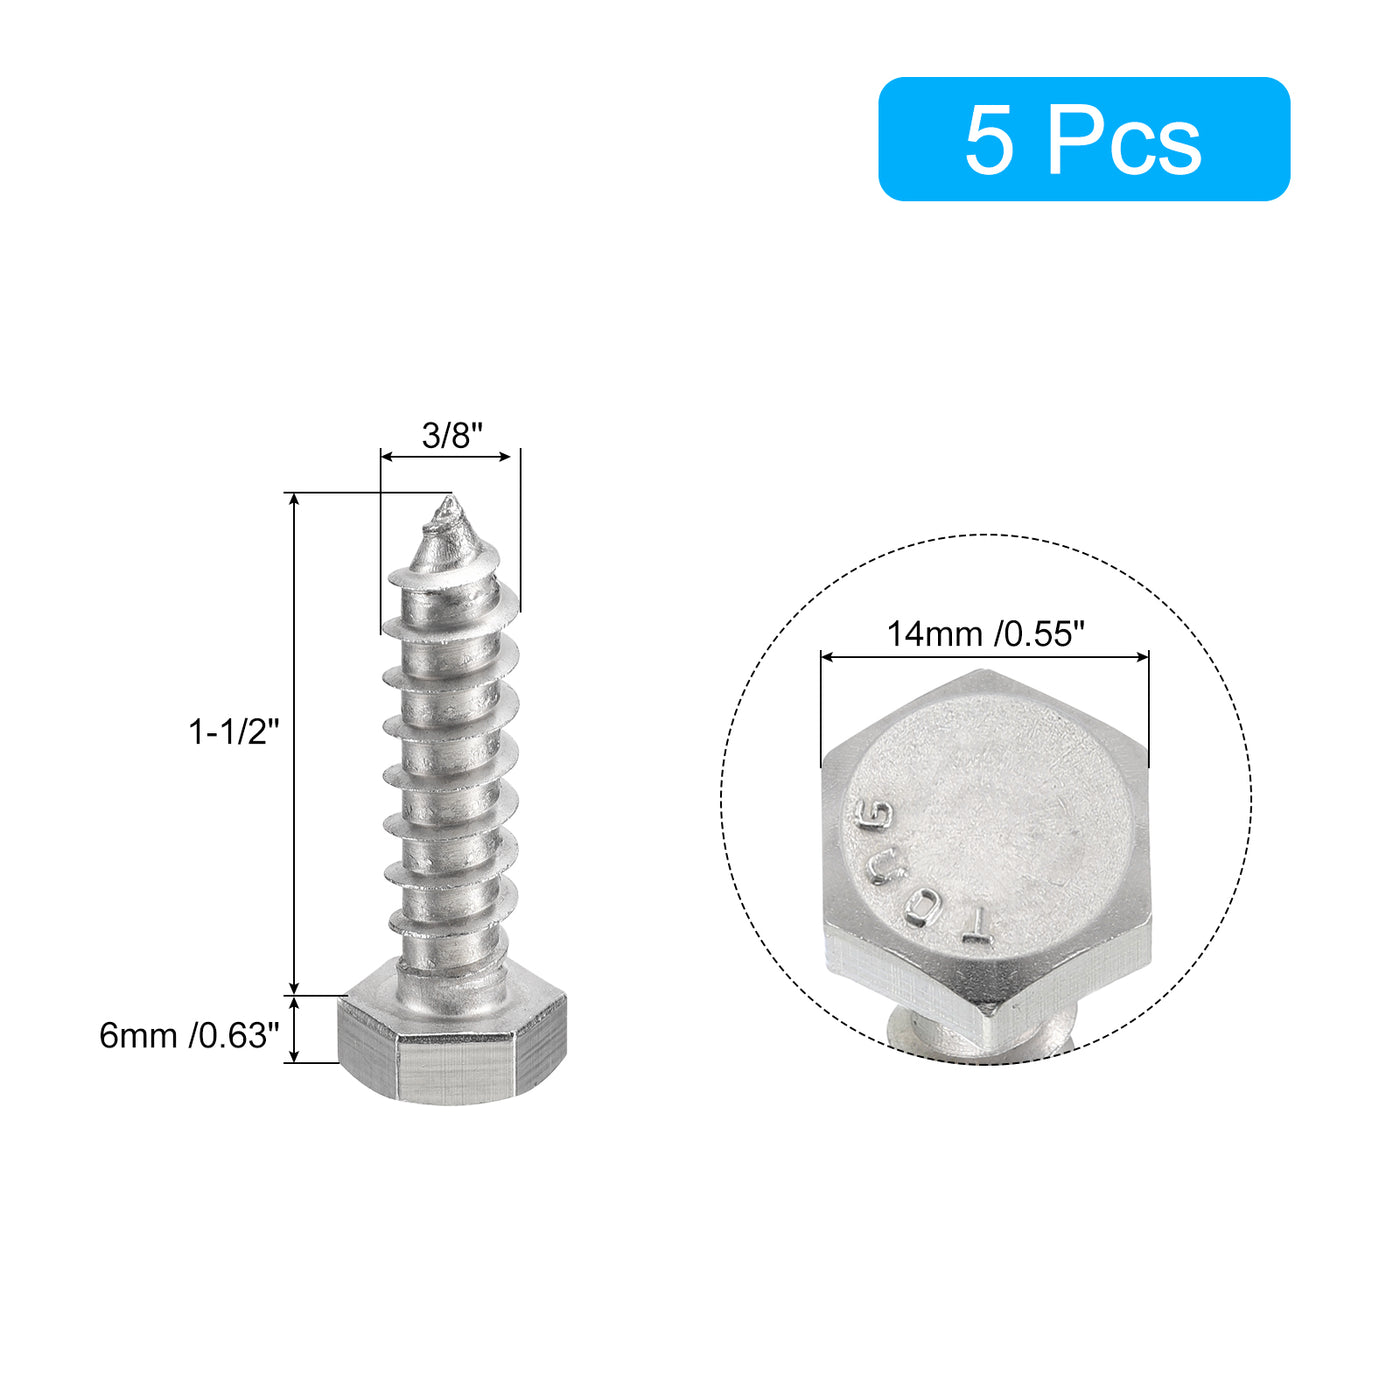 uxcell Uxcell Hex Head Lag Screws Bolts, 5pcs 3/8" x 1-1/2" 304 Stainless Steel Wood Screws